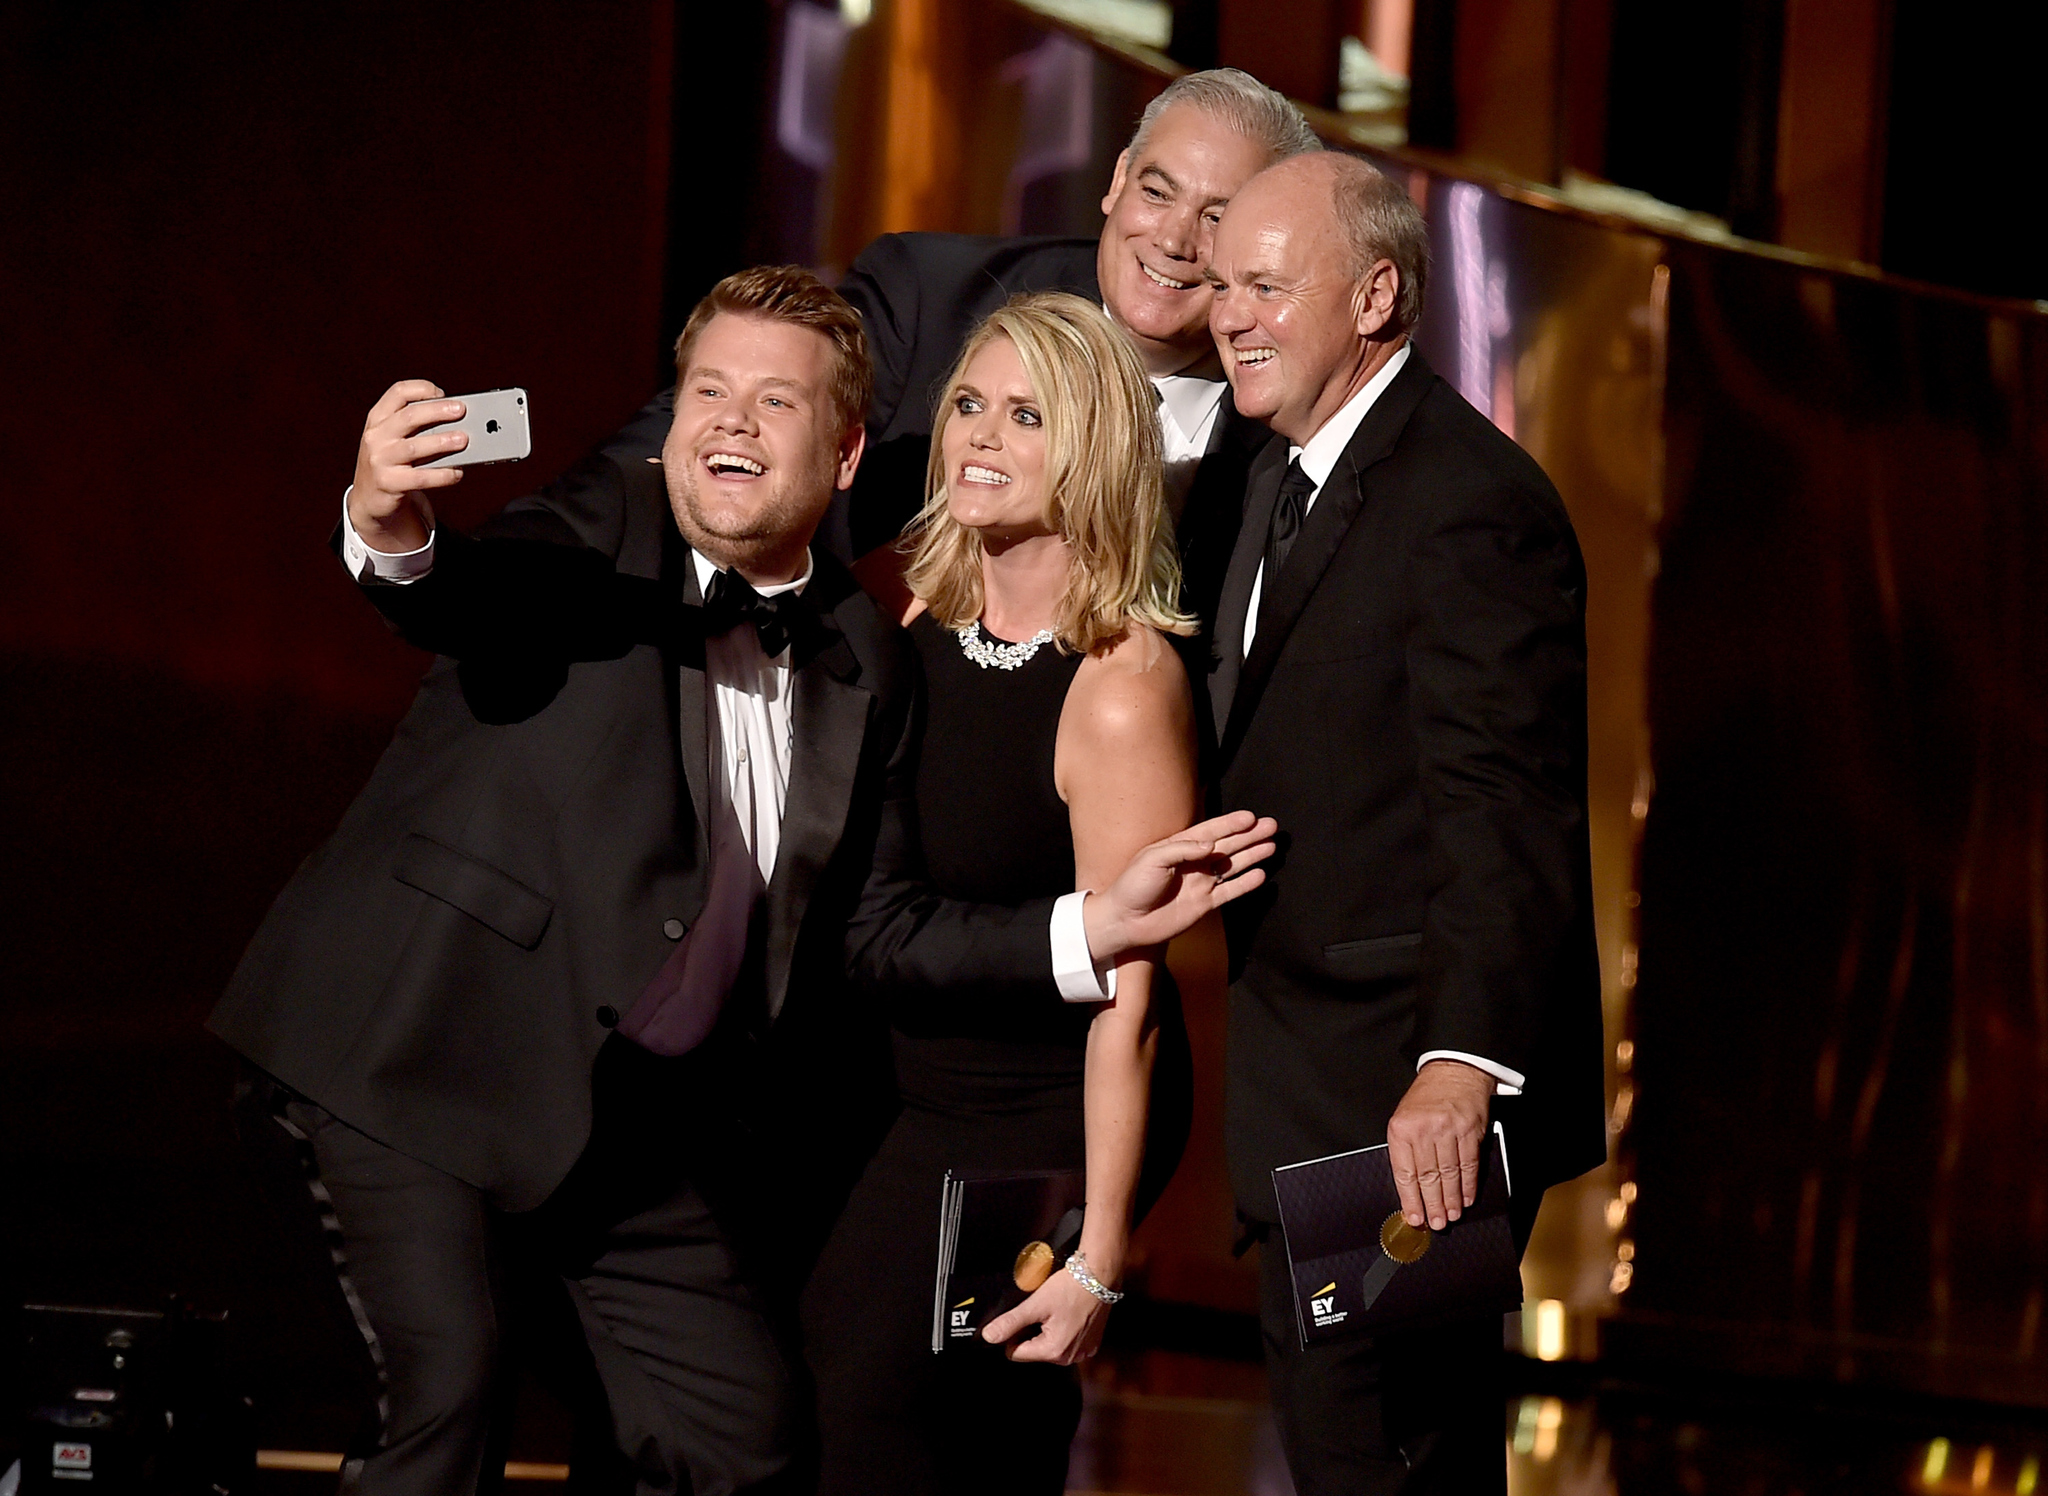 James Corden at event of The 67th Primetime Emmy Awards (2015)